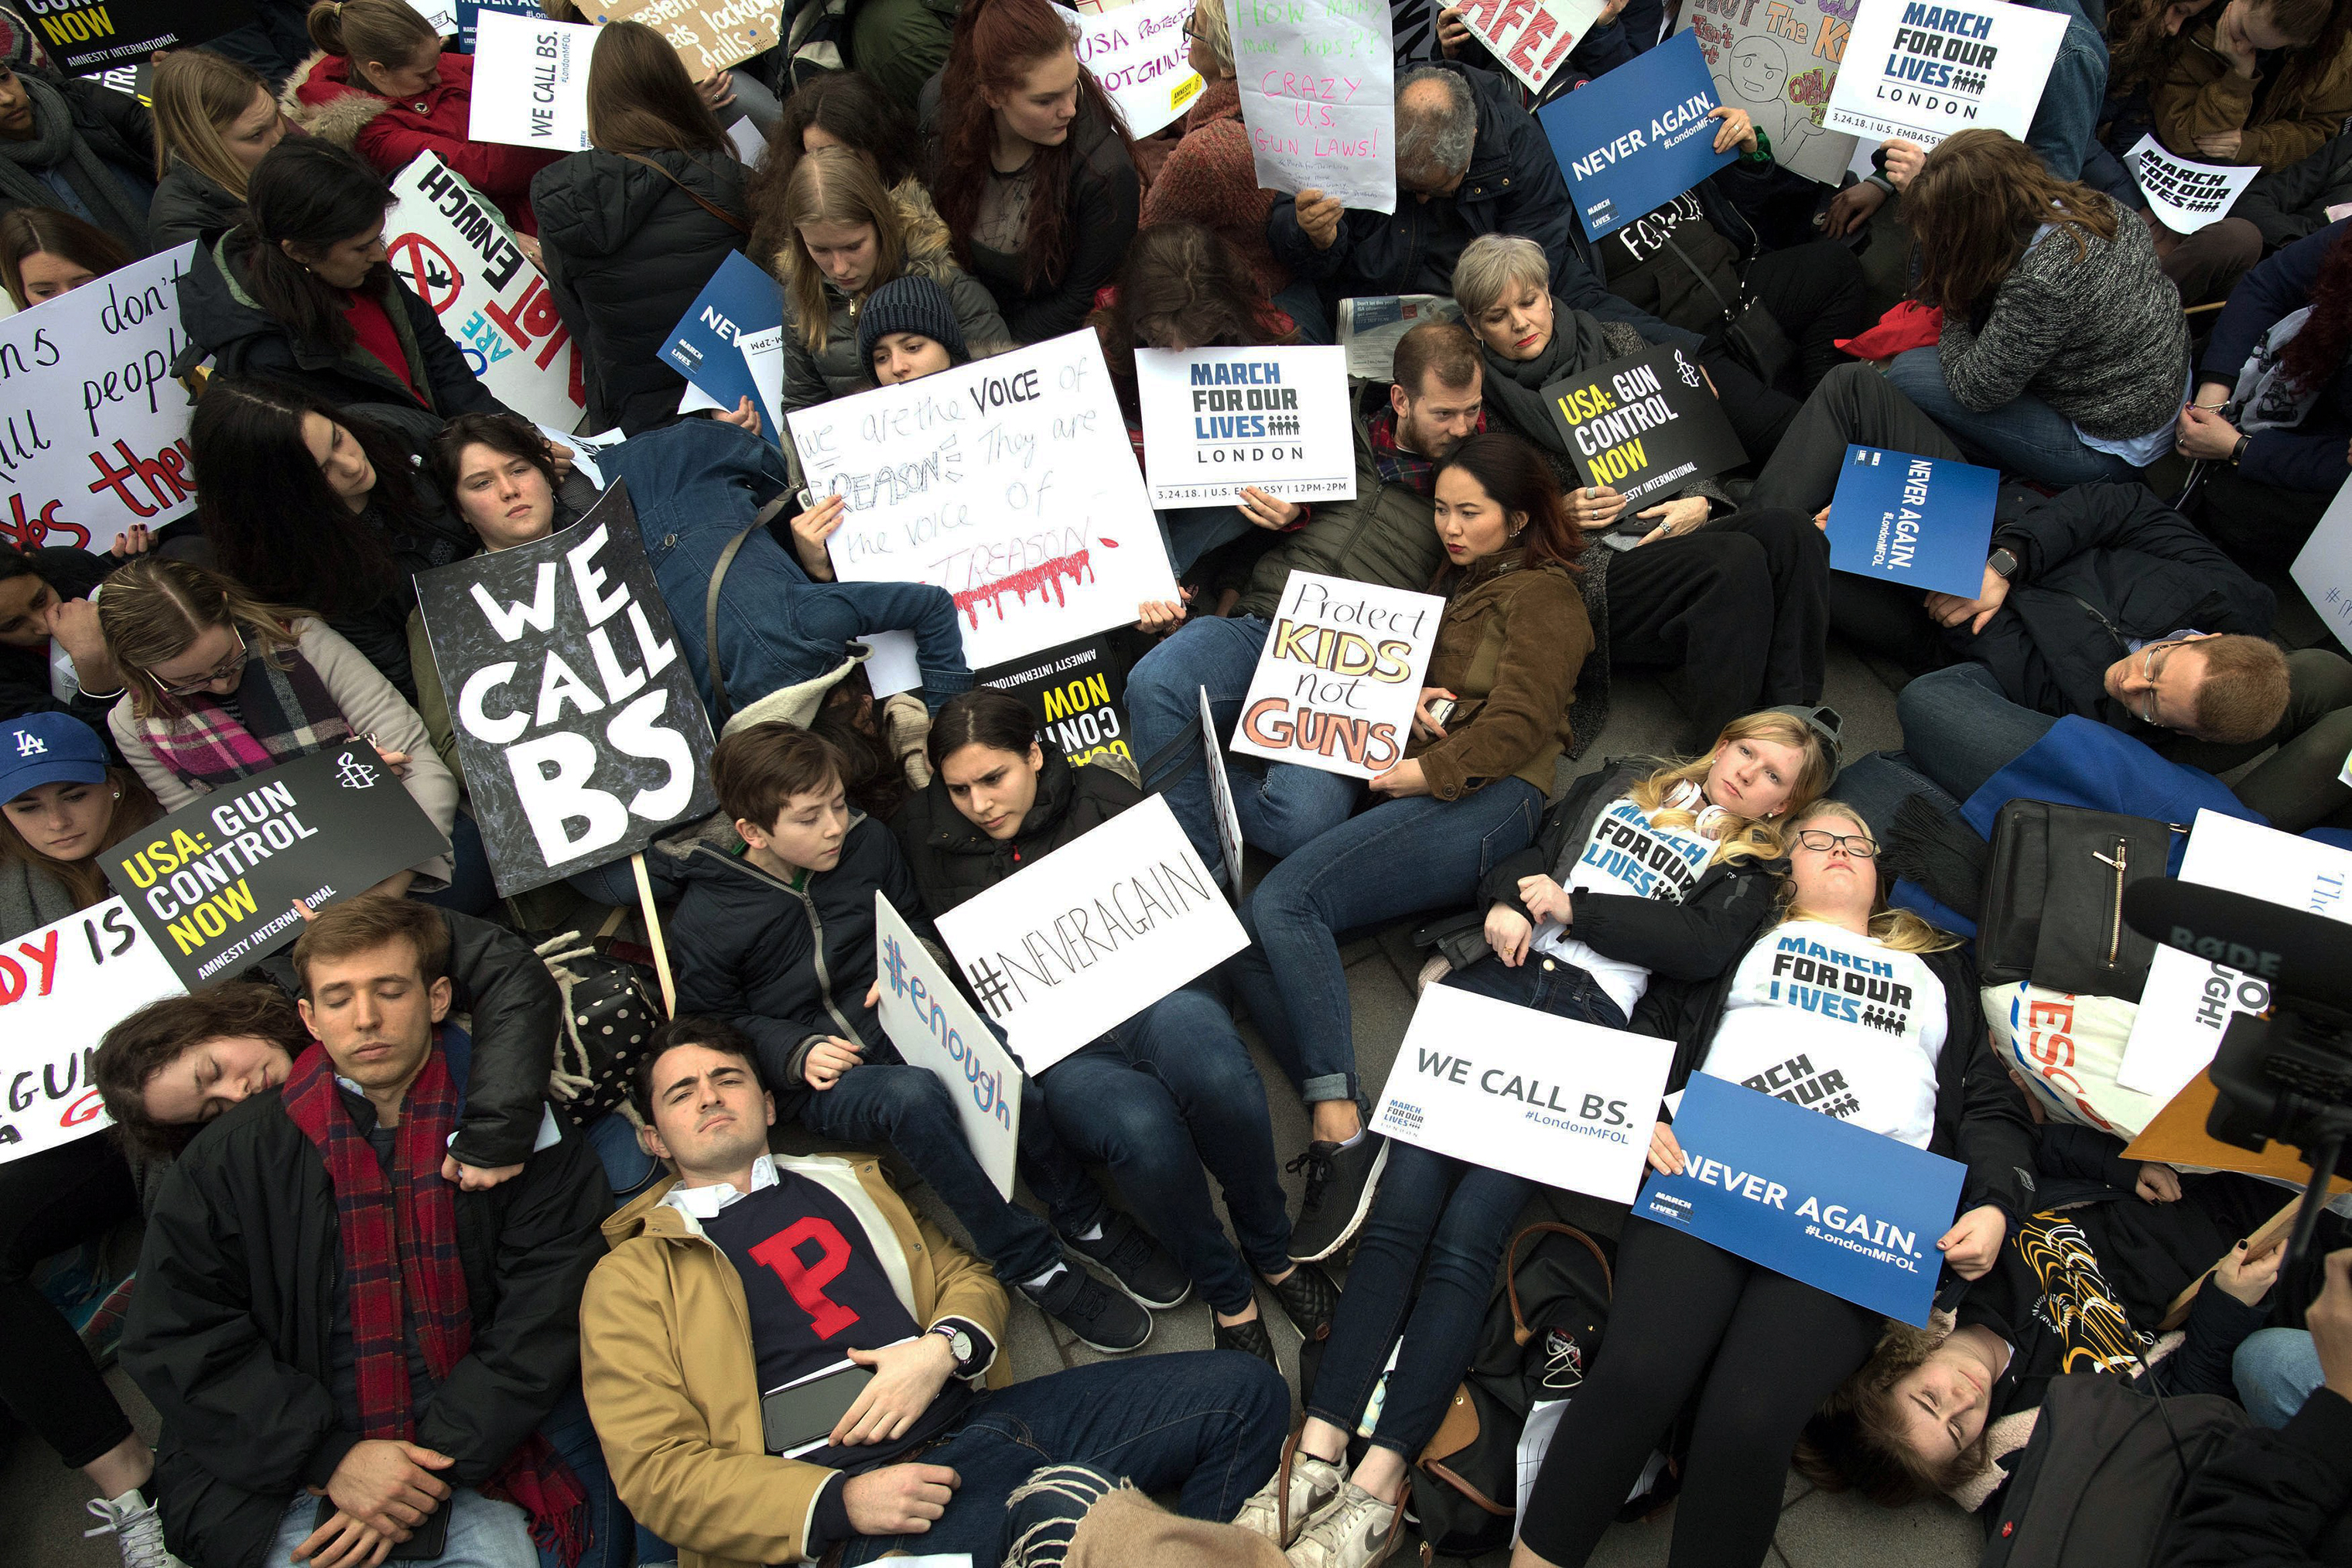 Protesters staged a 'die-in' during the March For Our Lives rally outside the U.S. Embassy in London. (Stefan Rousseau—PA Wire)